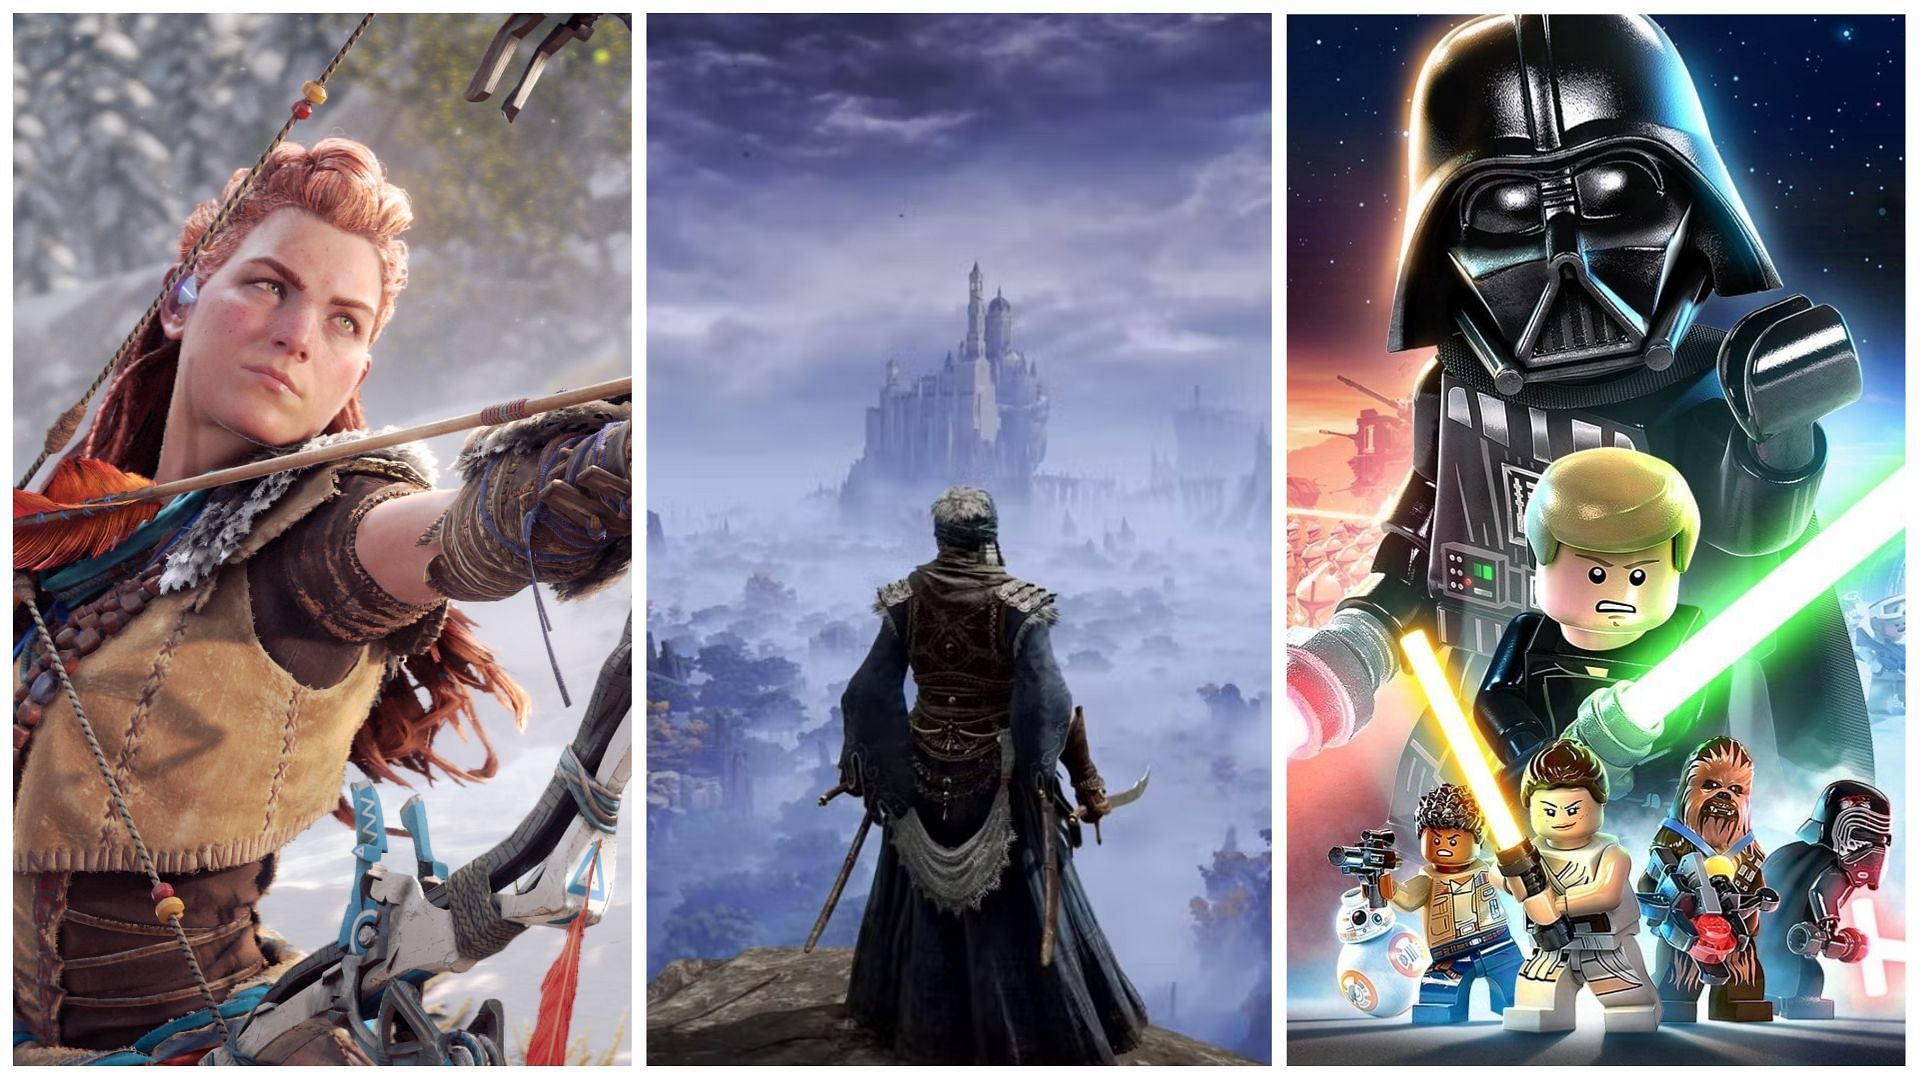 These games made 2022 one of the best years (from my perspective) in years  with 🥇 Horizon Forbidden West being my personal Game of the year followed  by runner-up 🥈 GOW Ragnarok. 